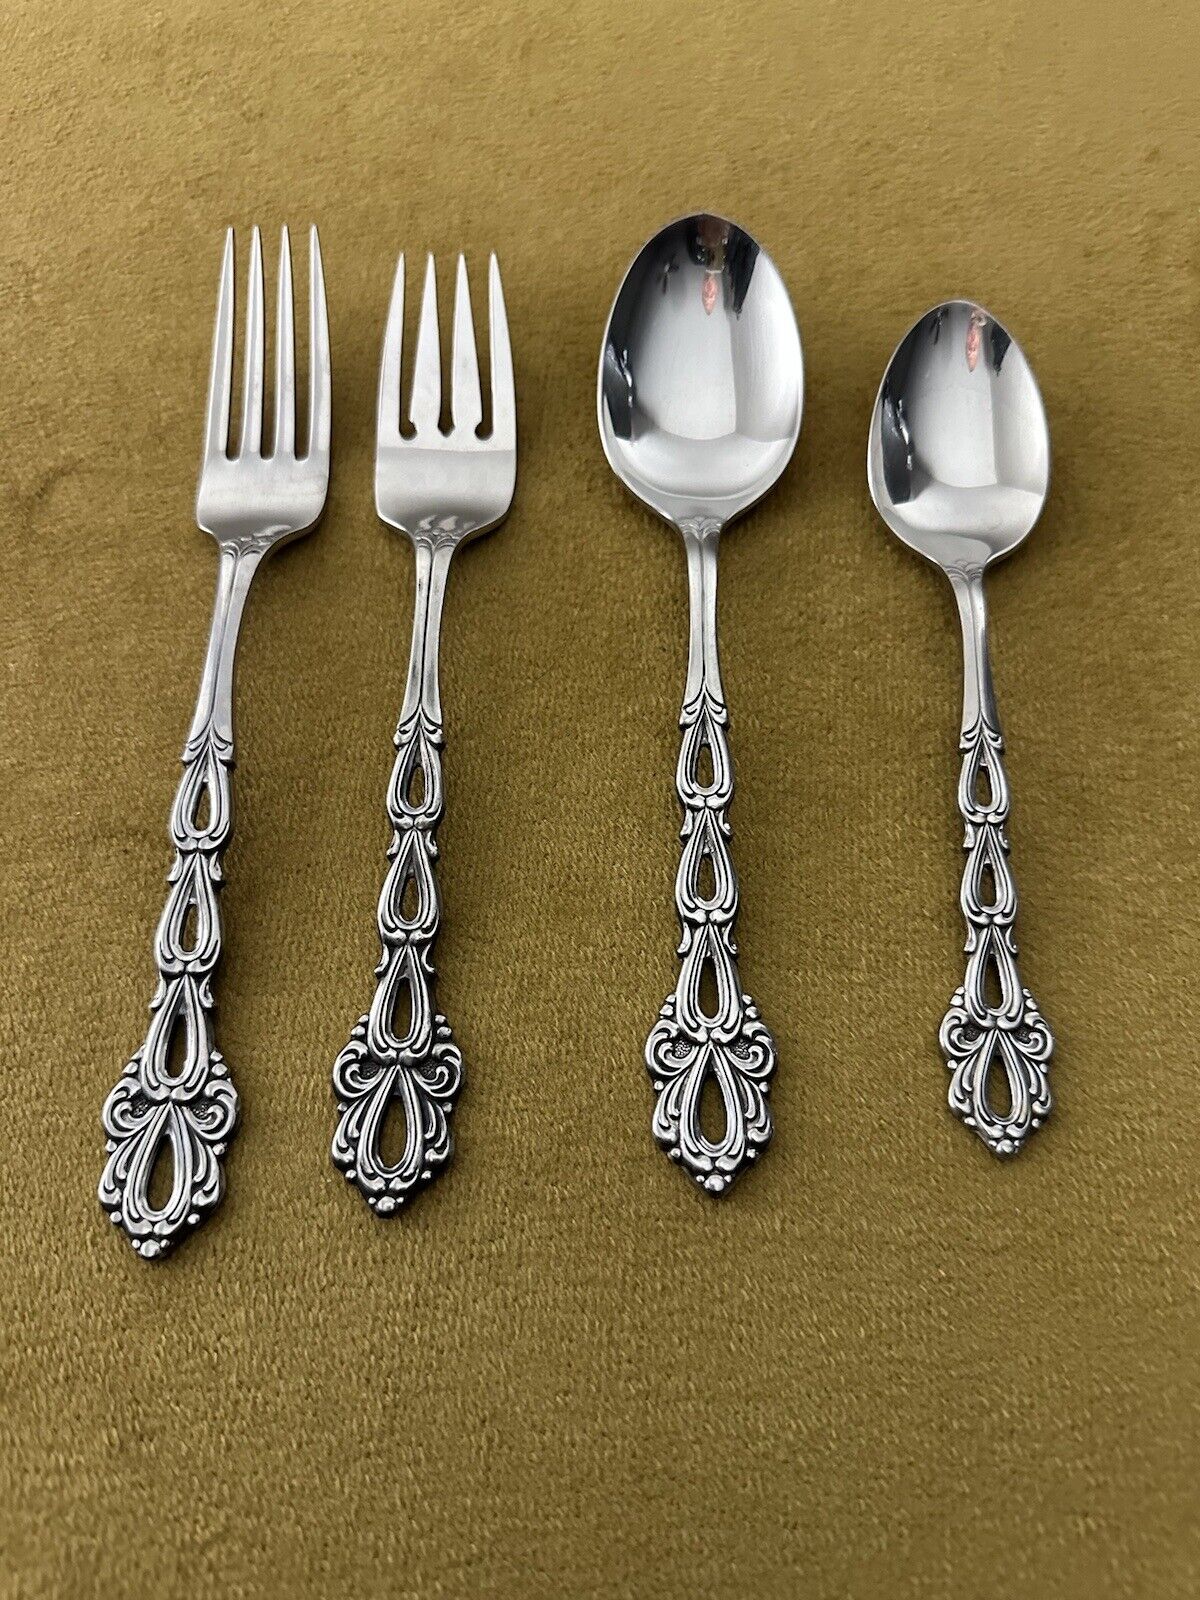 Oneida Community Stainless Flatware CHANDELIER 4 PIECE PLACE SETTING Excellent